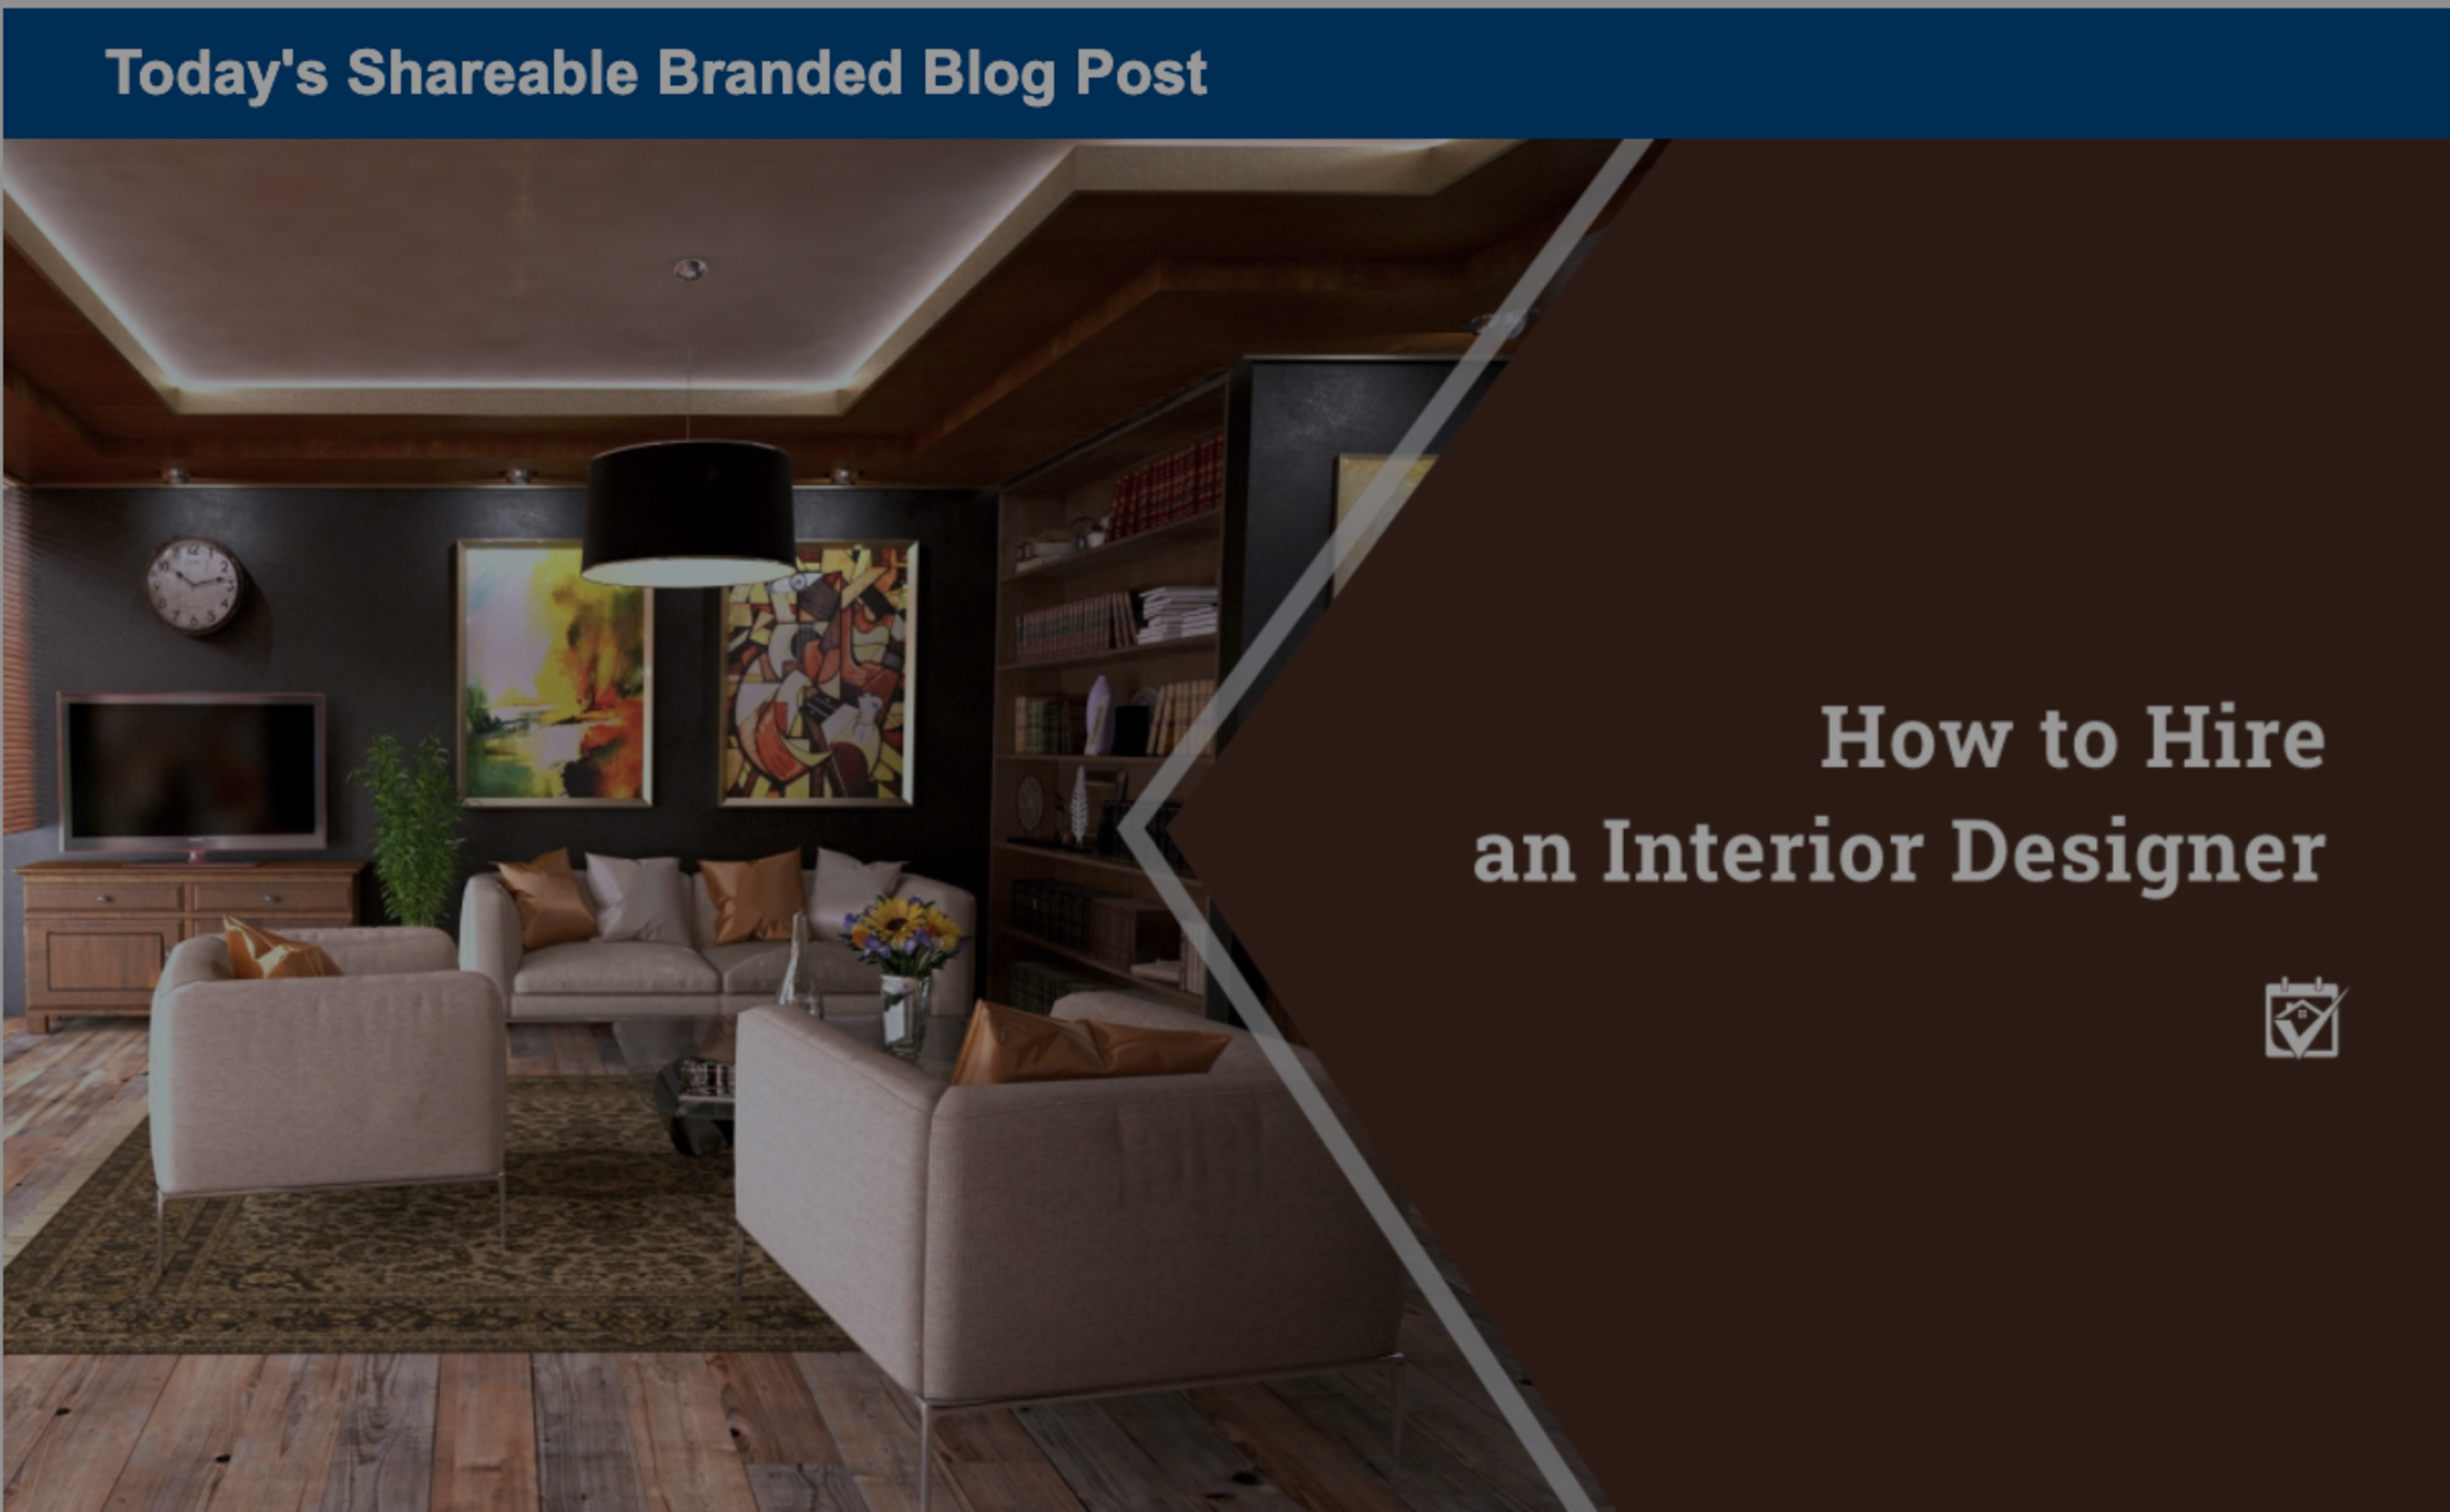 How to Hire an Interior Designer